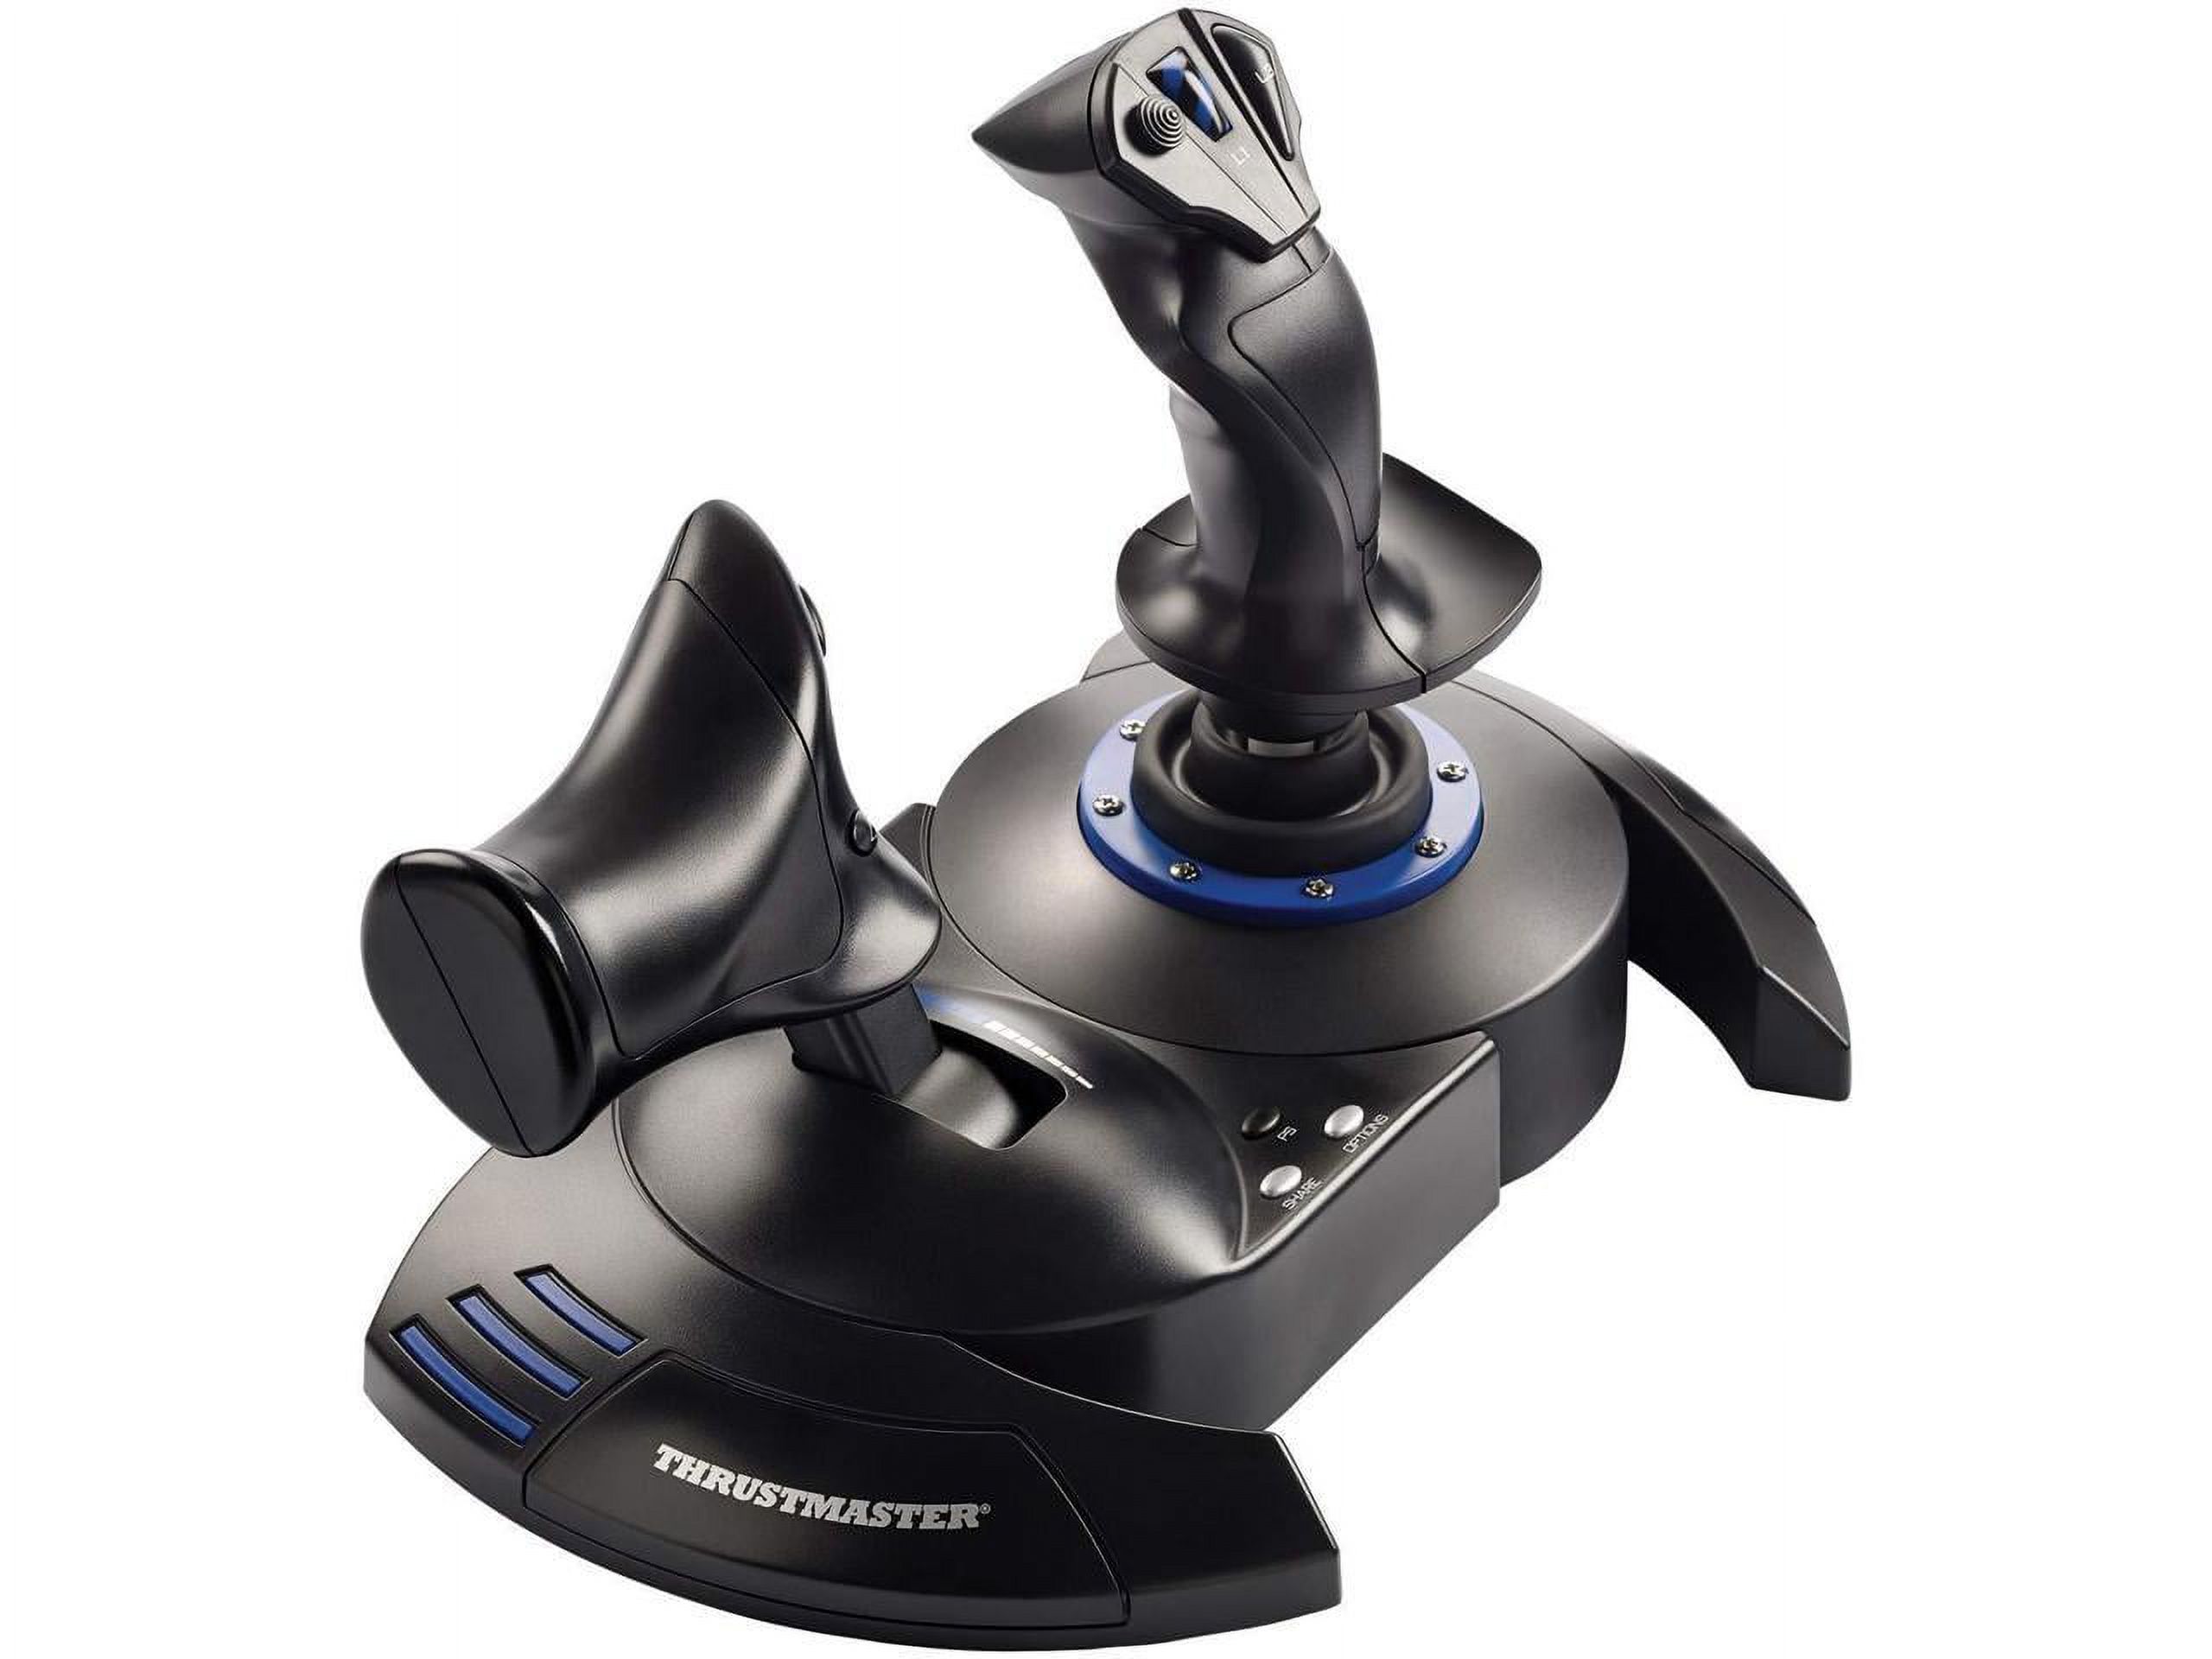 Thrustmaster T-Flight Hotas 4 - Joystick and Throttle - Wired - for Sony PlayStation 4 - image 2 of 14